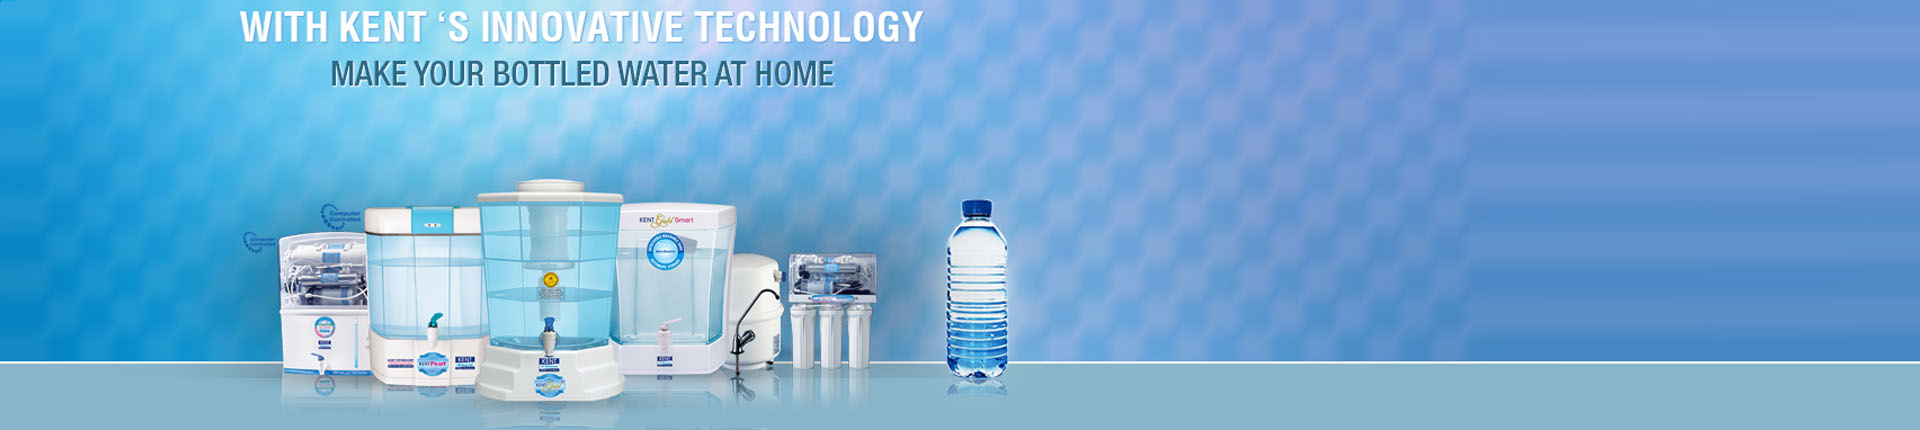 Kent ro service in bangalore, Kent ro service centre, Kent Customer care number, Kent ro customer care number, Kent ro service, Kent ro helpline number, kent ro amc, Kent service near me,Kent Water Purifiers for Home in Electronics City main road, Kent Water Purifier Services in Electronics City, RO Water Purifiers in Electronics City, Kent RO Services in Electronics City, Kent Water Purifier Repair in Electronics City, Kent Water Purifier Service Center in Electronics City